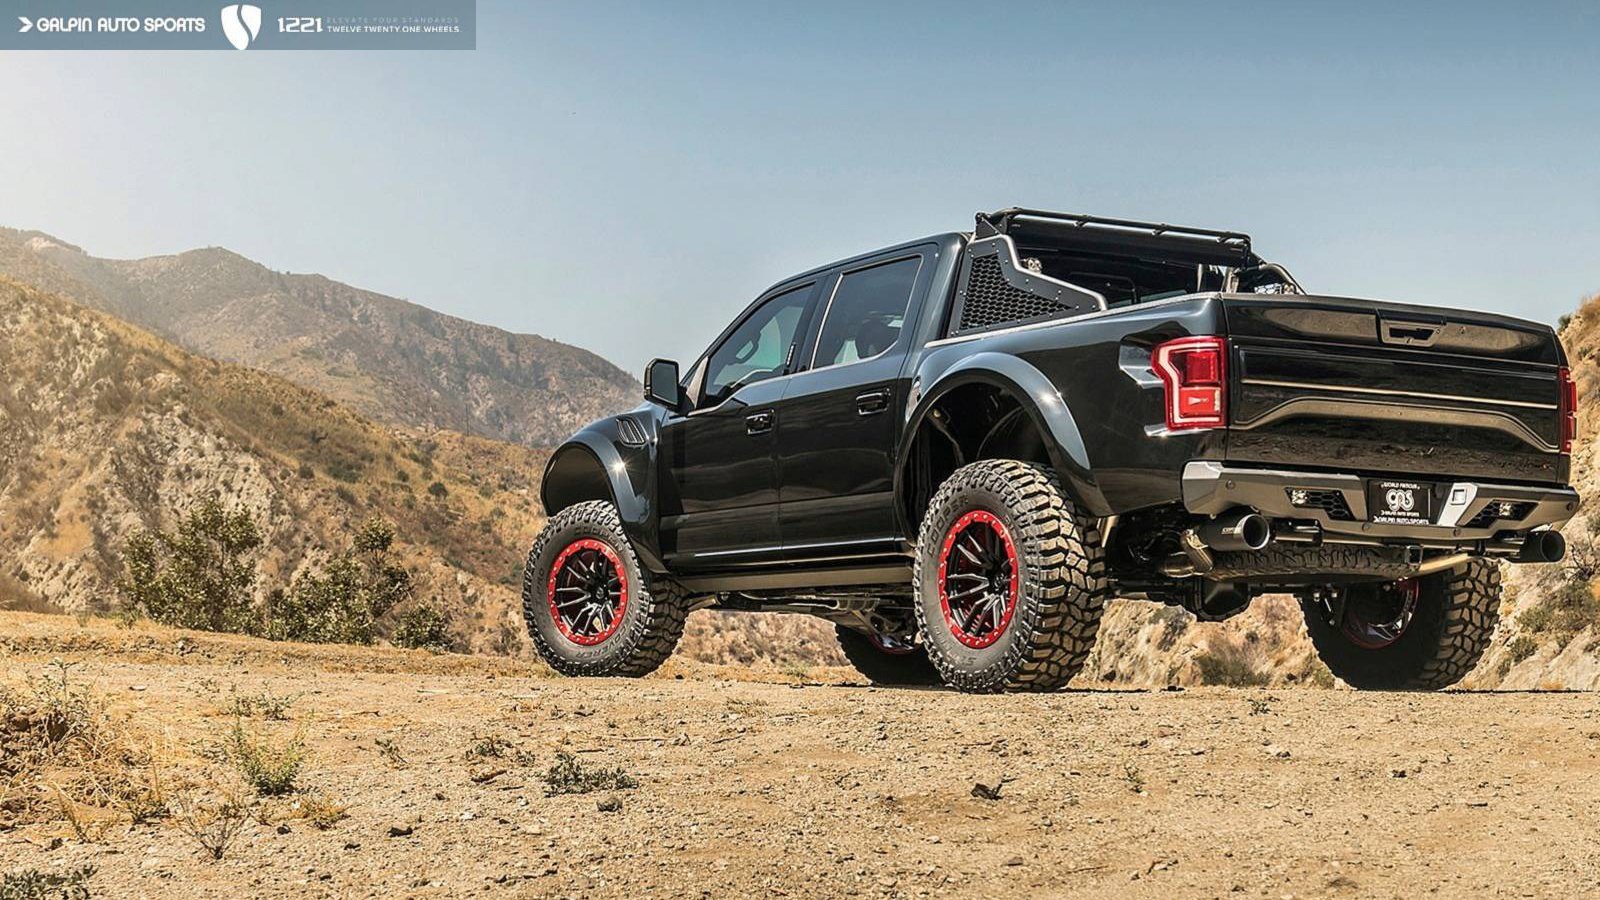 Black Lifted Ford F-150 with Headache Rack - Photo by Galpin Auto Sports